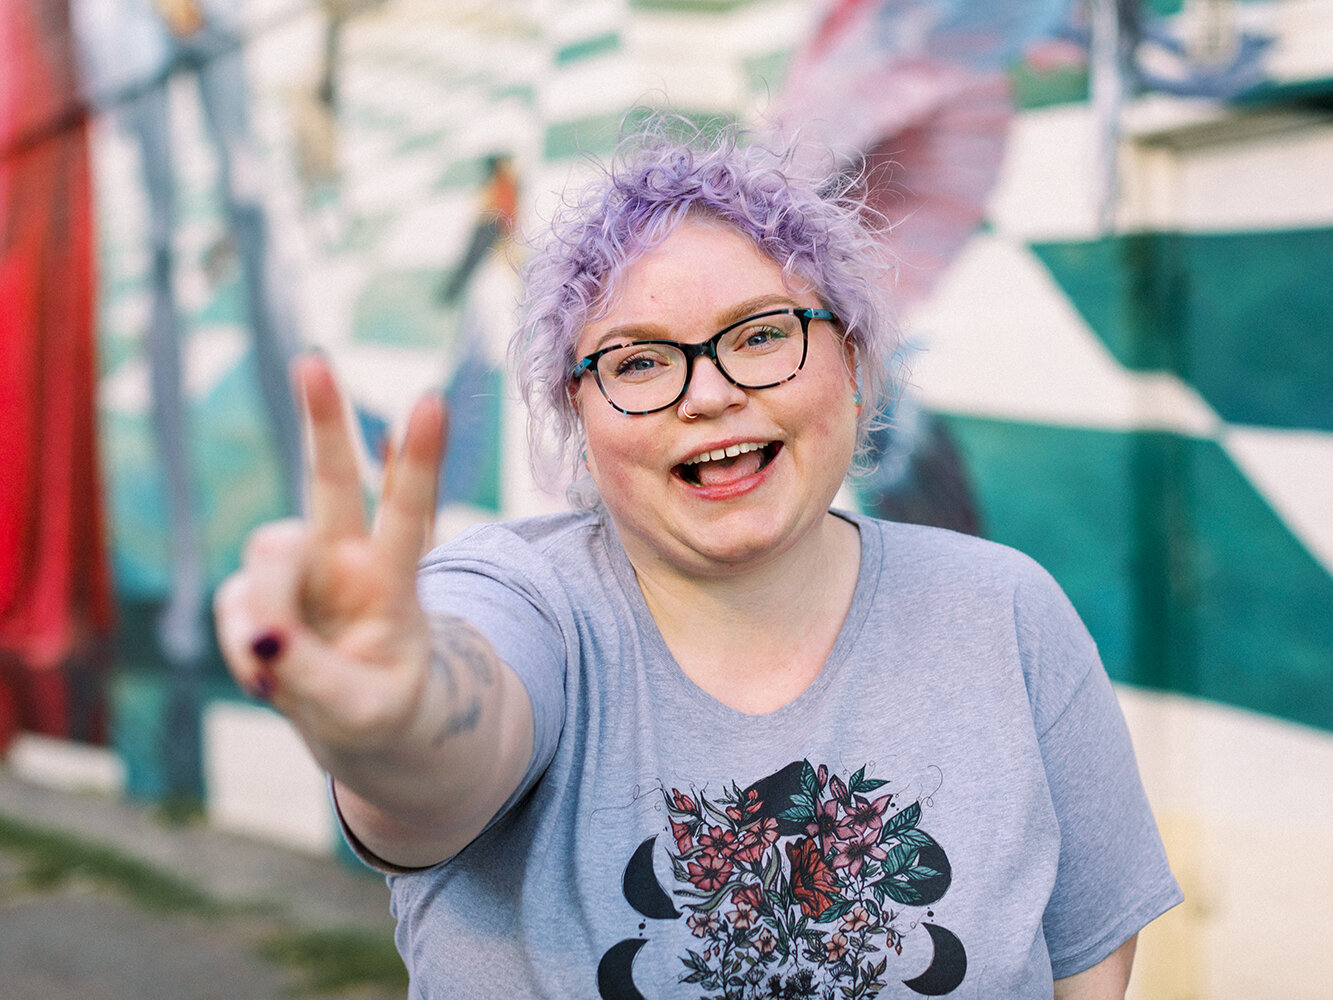 a woman with short curly purple hair is giving a peace sign with her hand and smiling